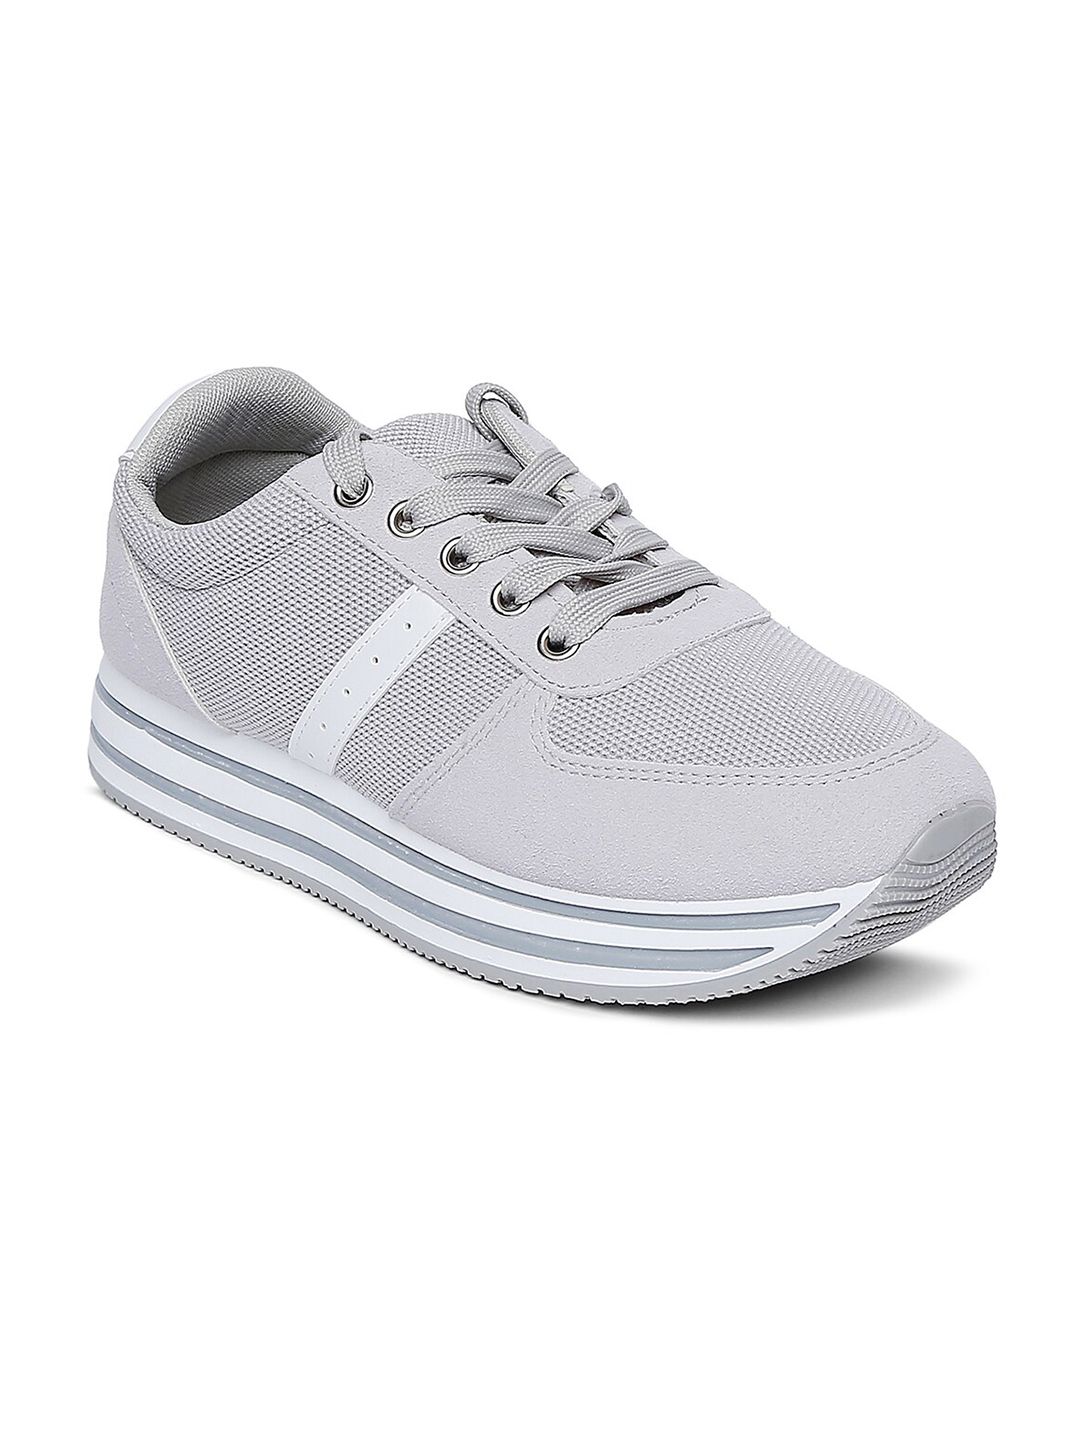 Forever Glam by Pantaloons Women Grey Mesh Walking Shoes Price in India